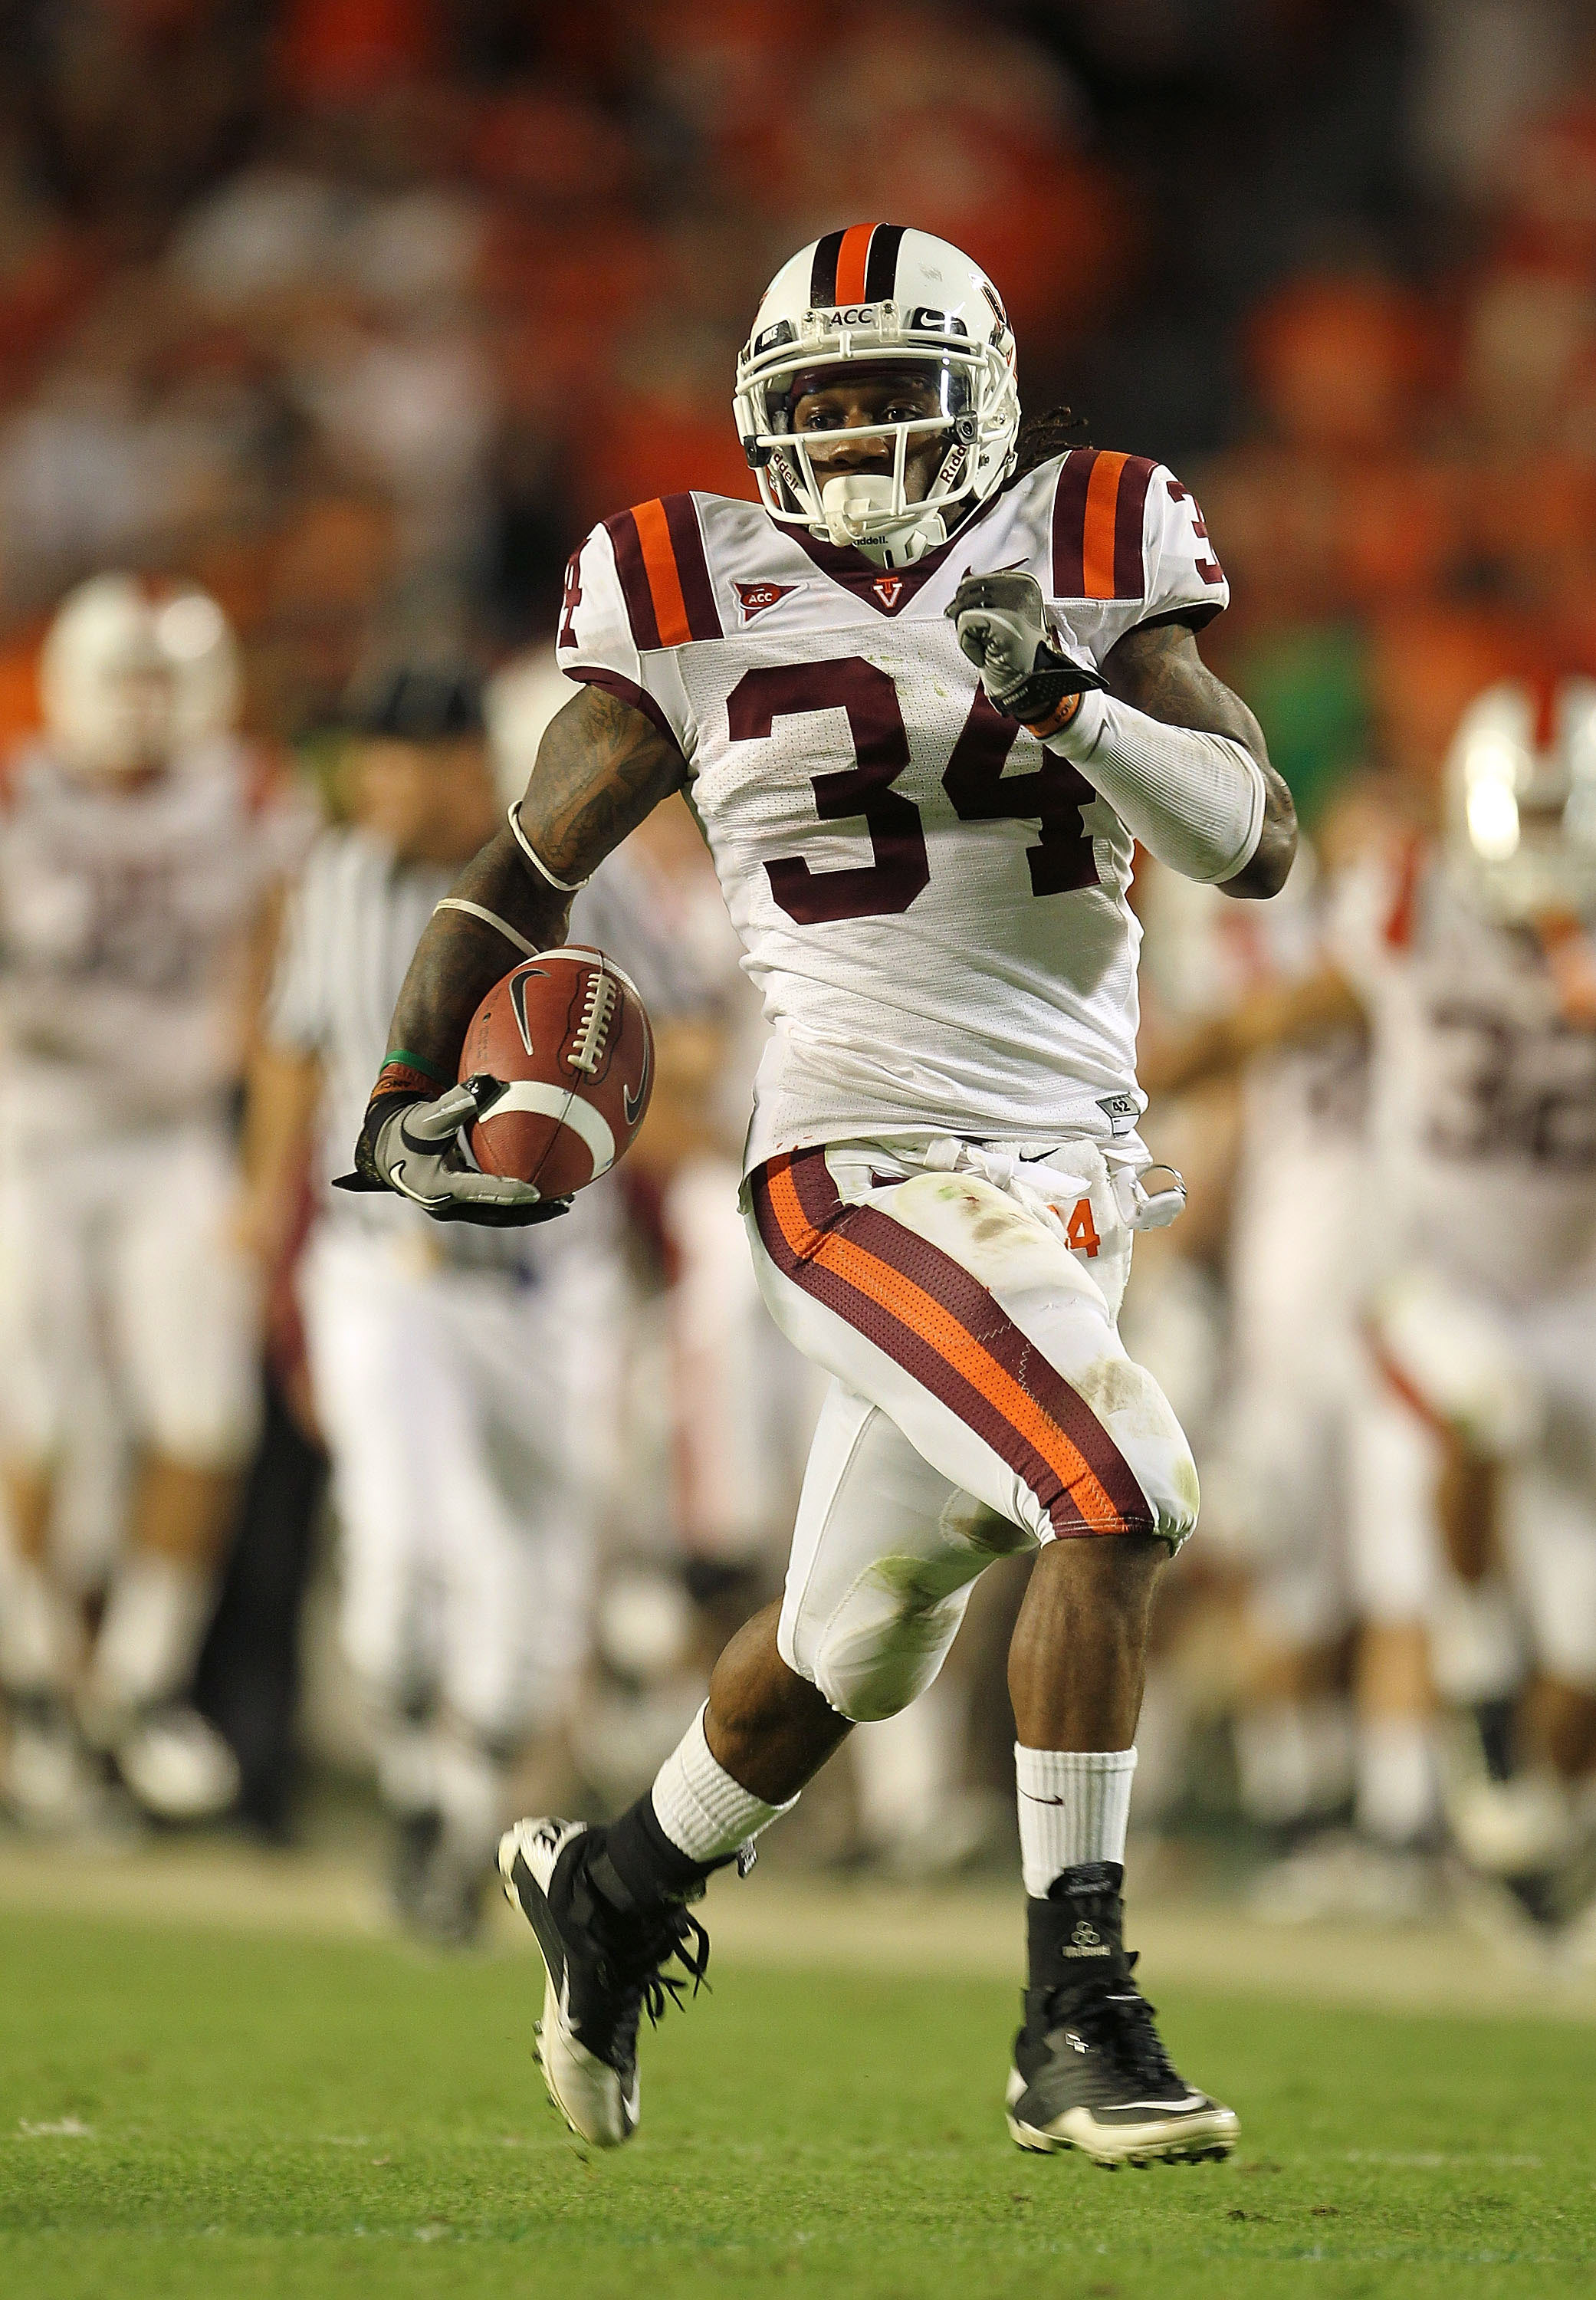 MIAMI - NOVEMBER 20:  Ryan Williams #34 of the Virginia Tech Hokies runs for a touchdown during a game against the Miami Hurricanes at Sun Life Stadium on November 20, 2010 in Miami, Florida.  (Photo by Mike Ehrmann/Getty Images)